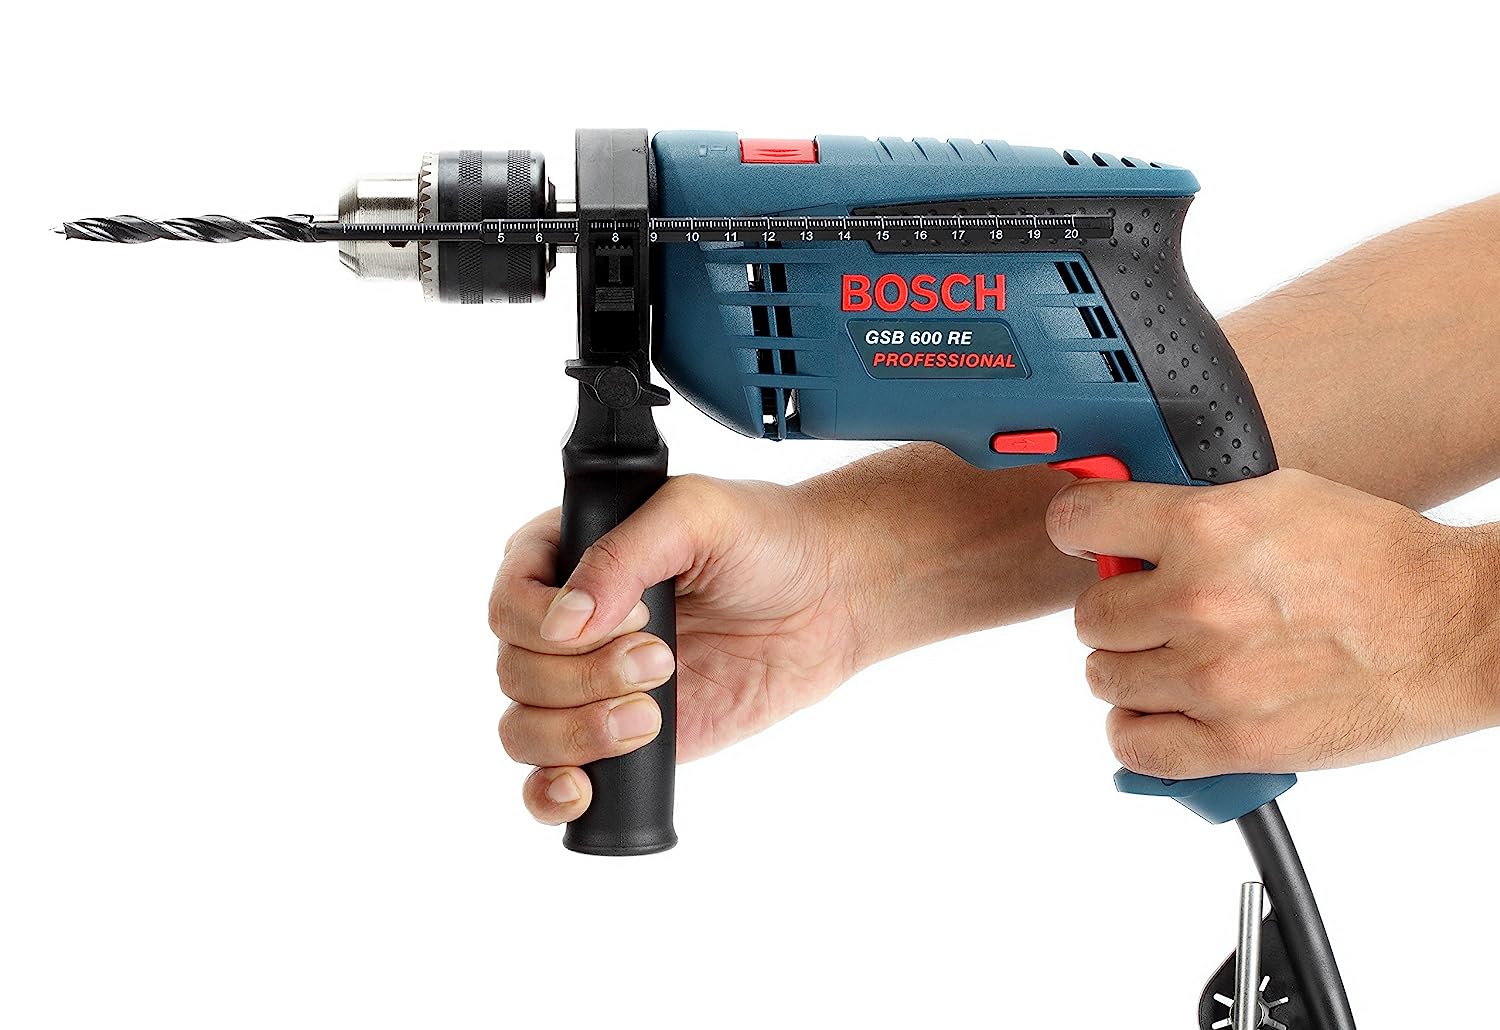 Bosch: GSB 600RE 600W Drill Machine Impact with Professional Tool Kit